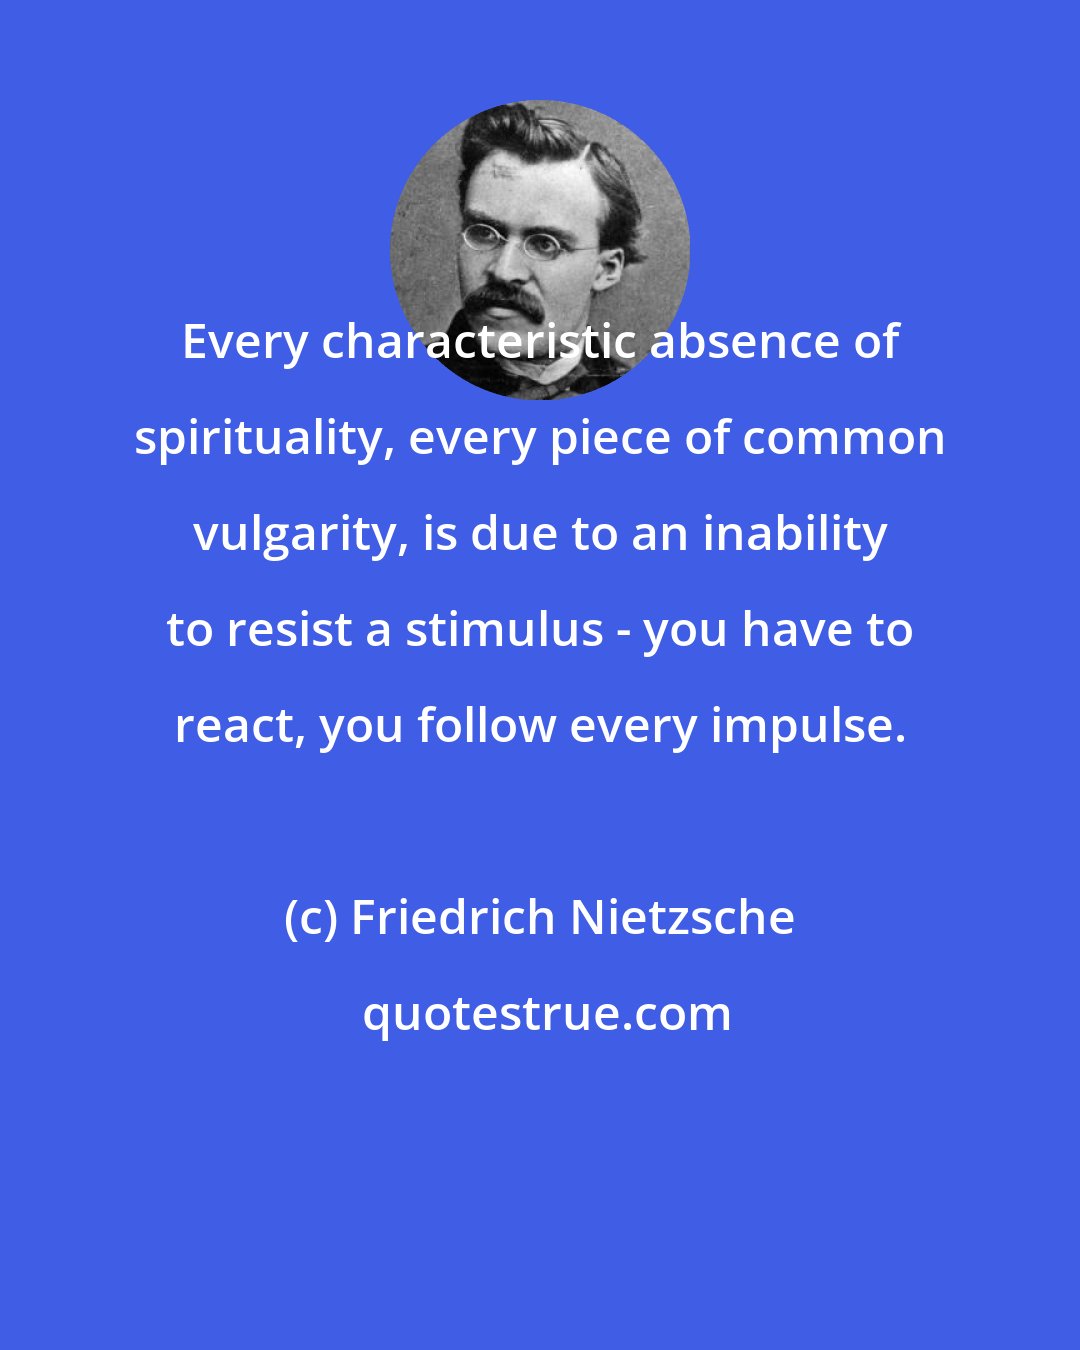 Friedrich Nietzsche: Every characteristic absence of spirituality, every piece of common vulgarity, is due to an inability to resist a stimulus - you have to react, you follow every impulse.